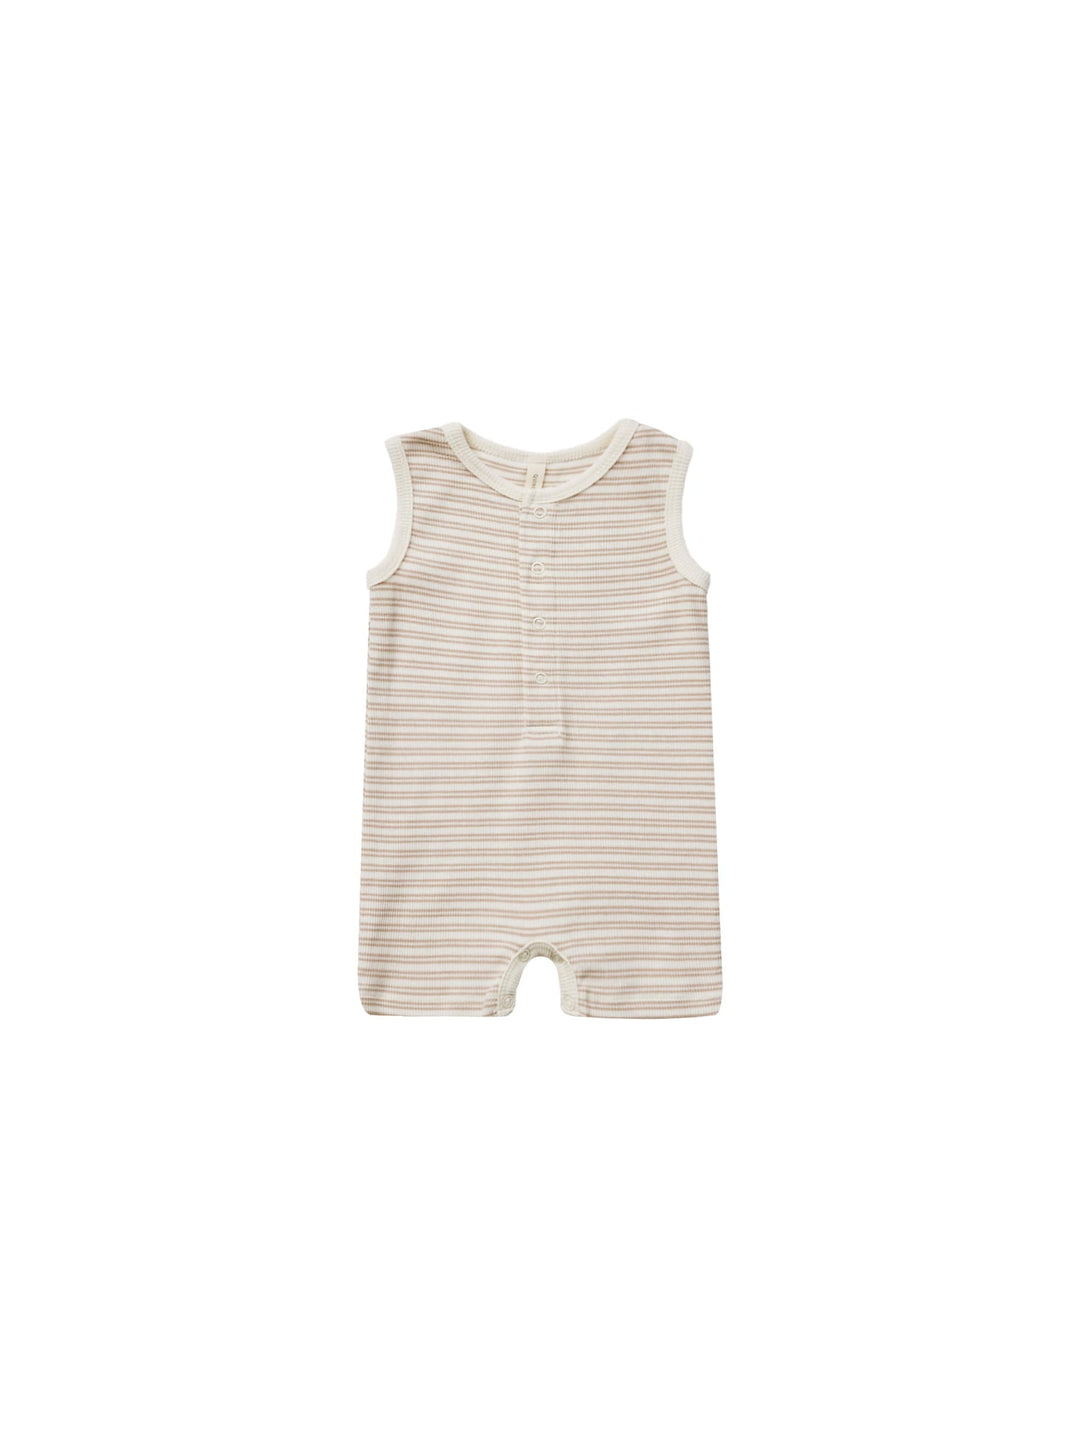 Quincy Mae Jumpsuits & Rompers Ribbed Henley Romper - Oat Stripe